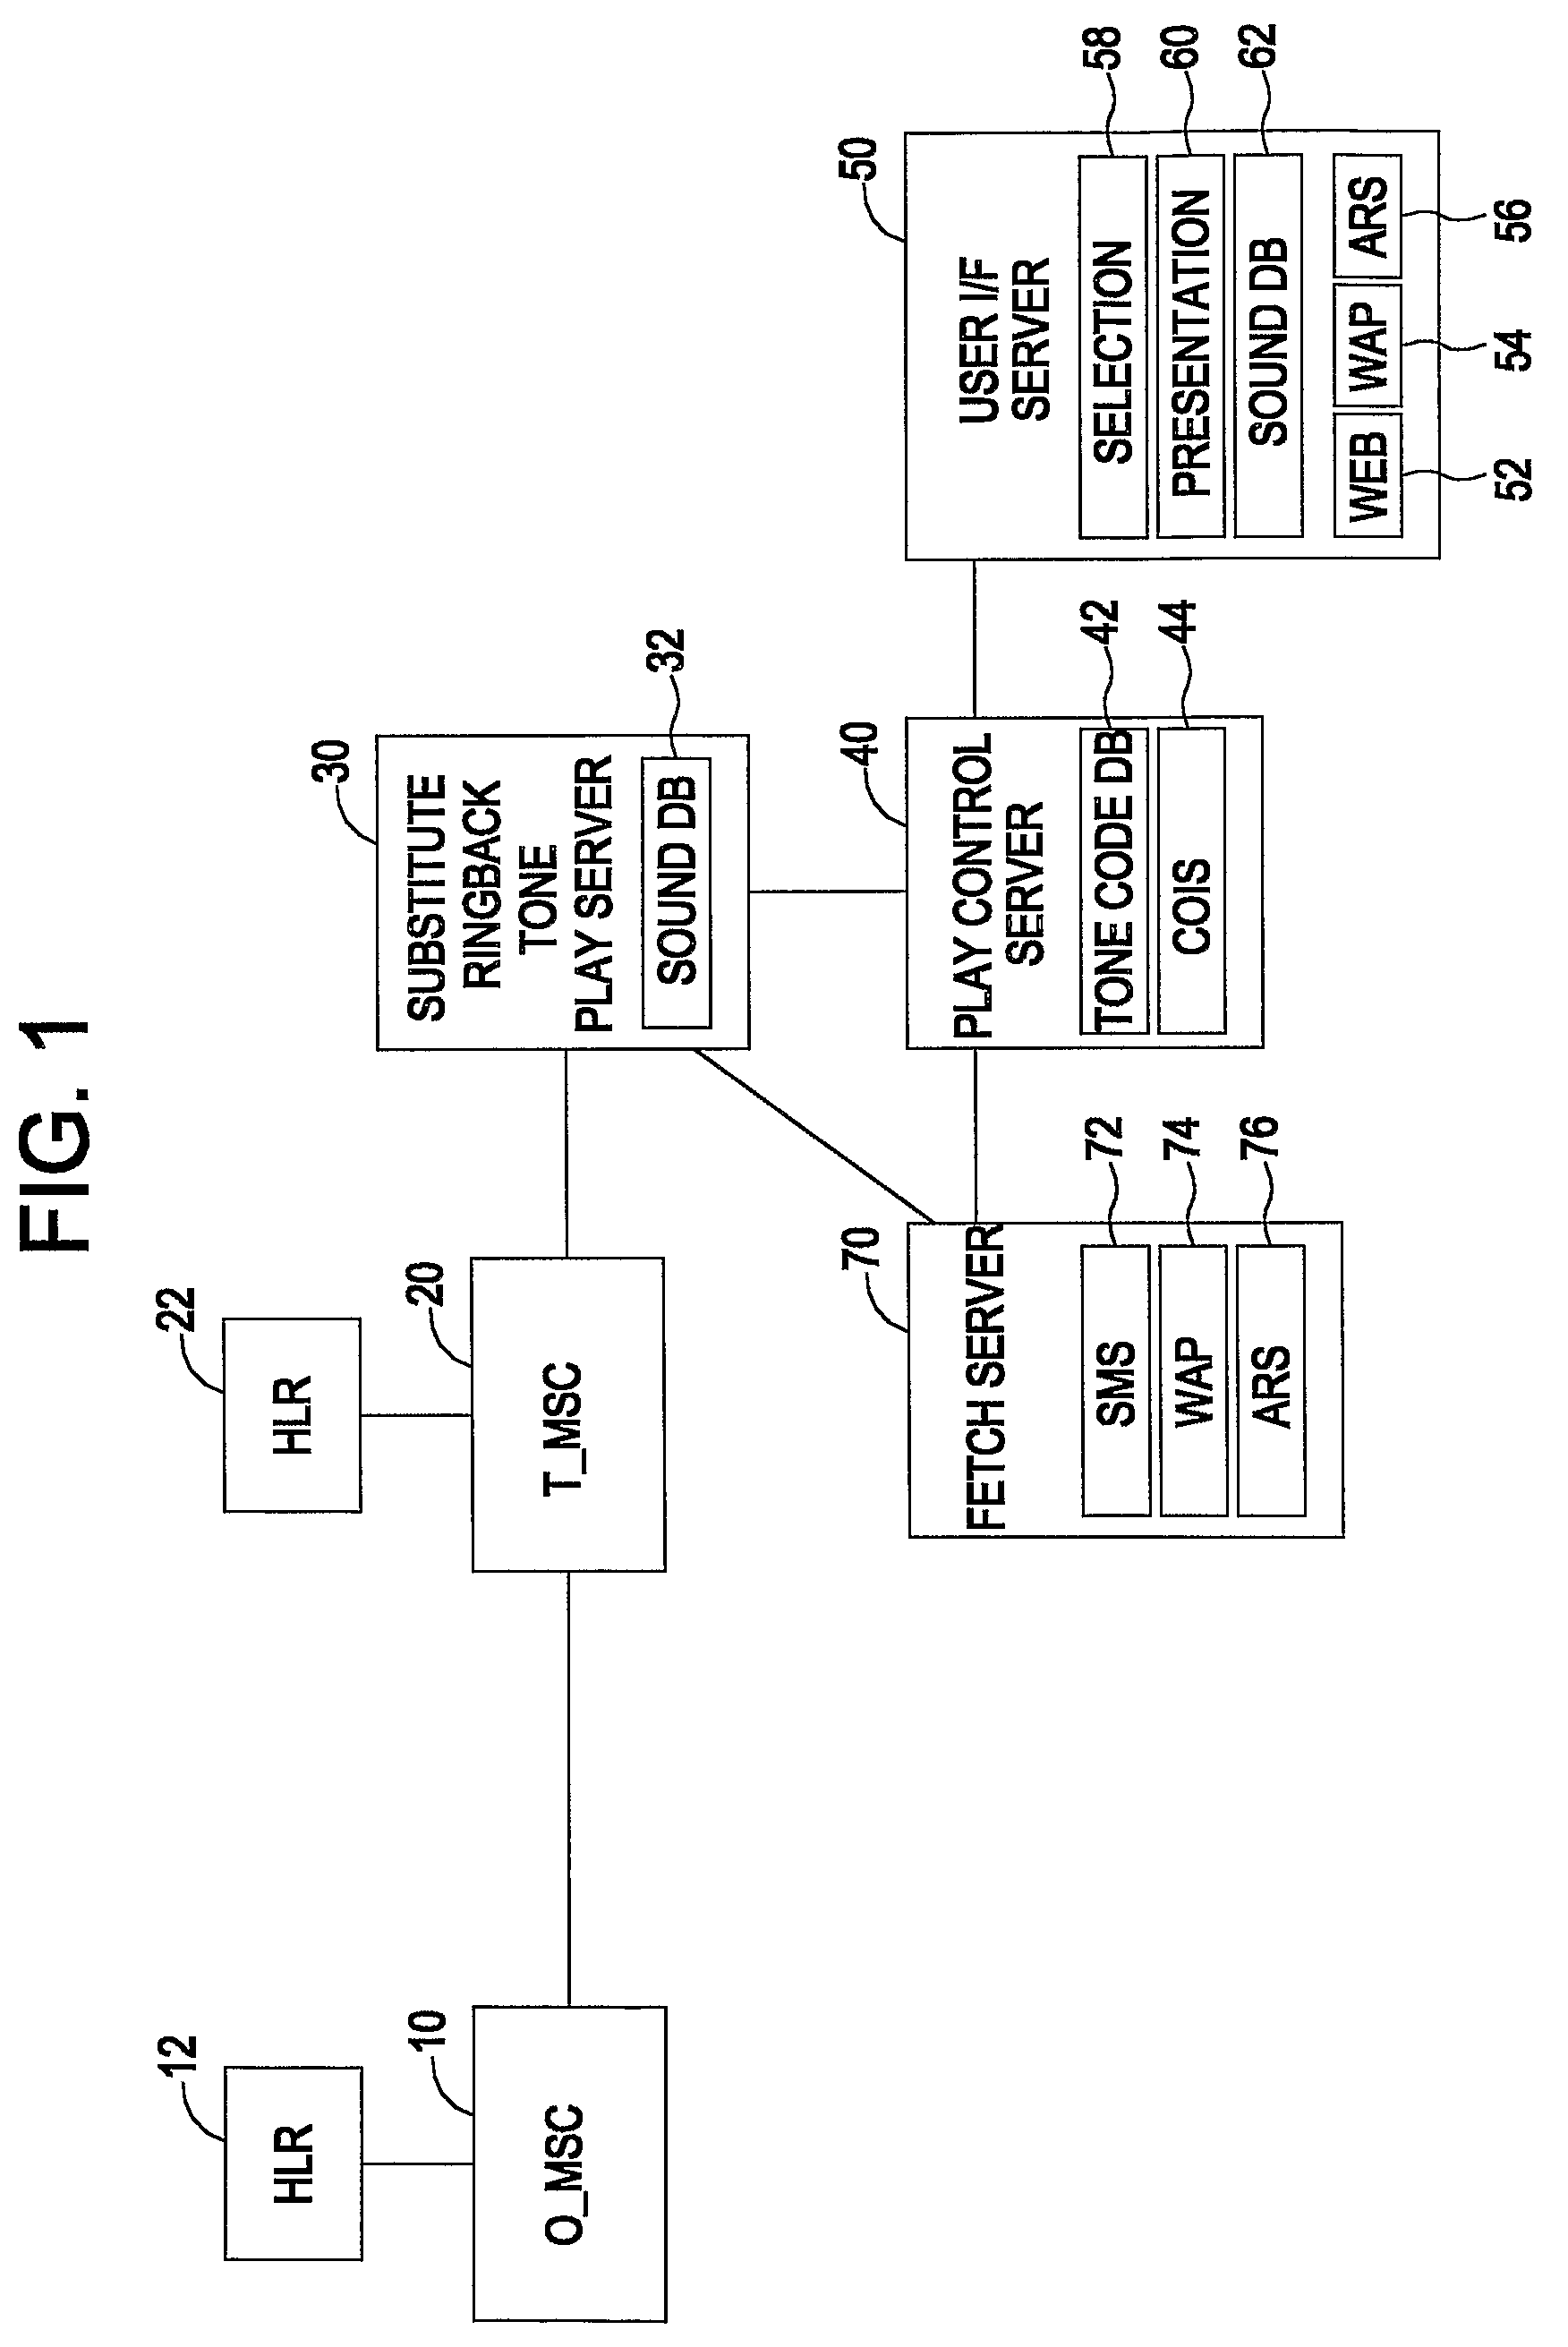 Method for setting substitute ringback tone of calling party in mobile communications system